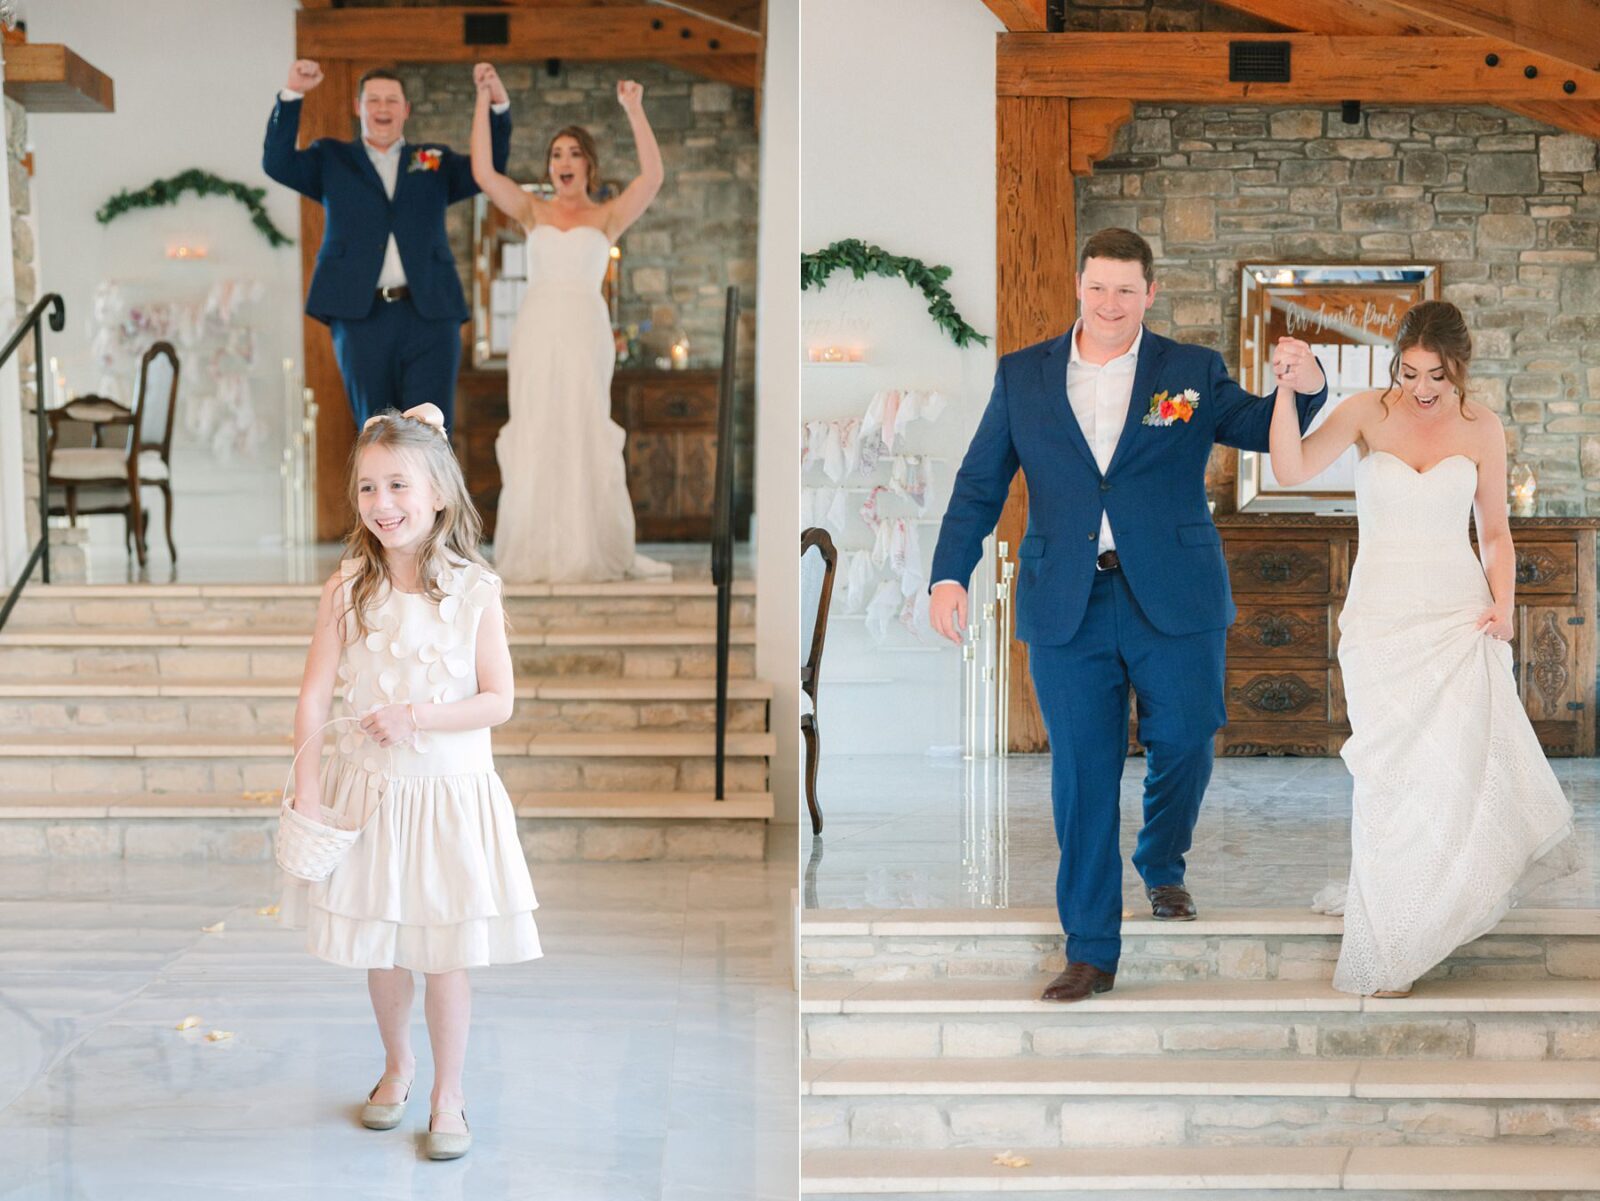 flower girl, bride and groom cheering for flower girl, bride and groom grand entrance, videre estate reception